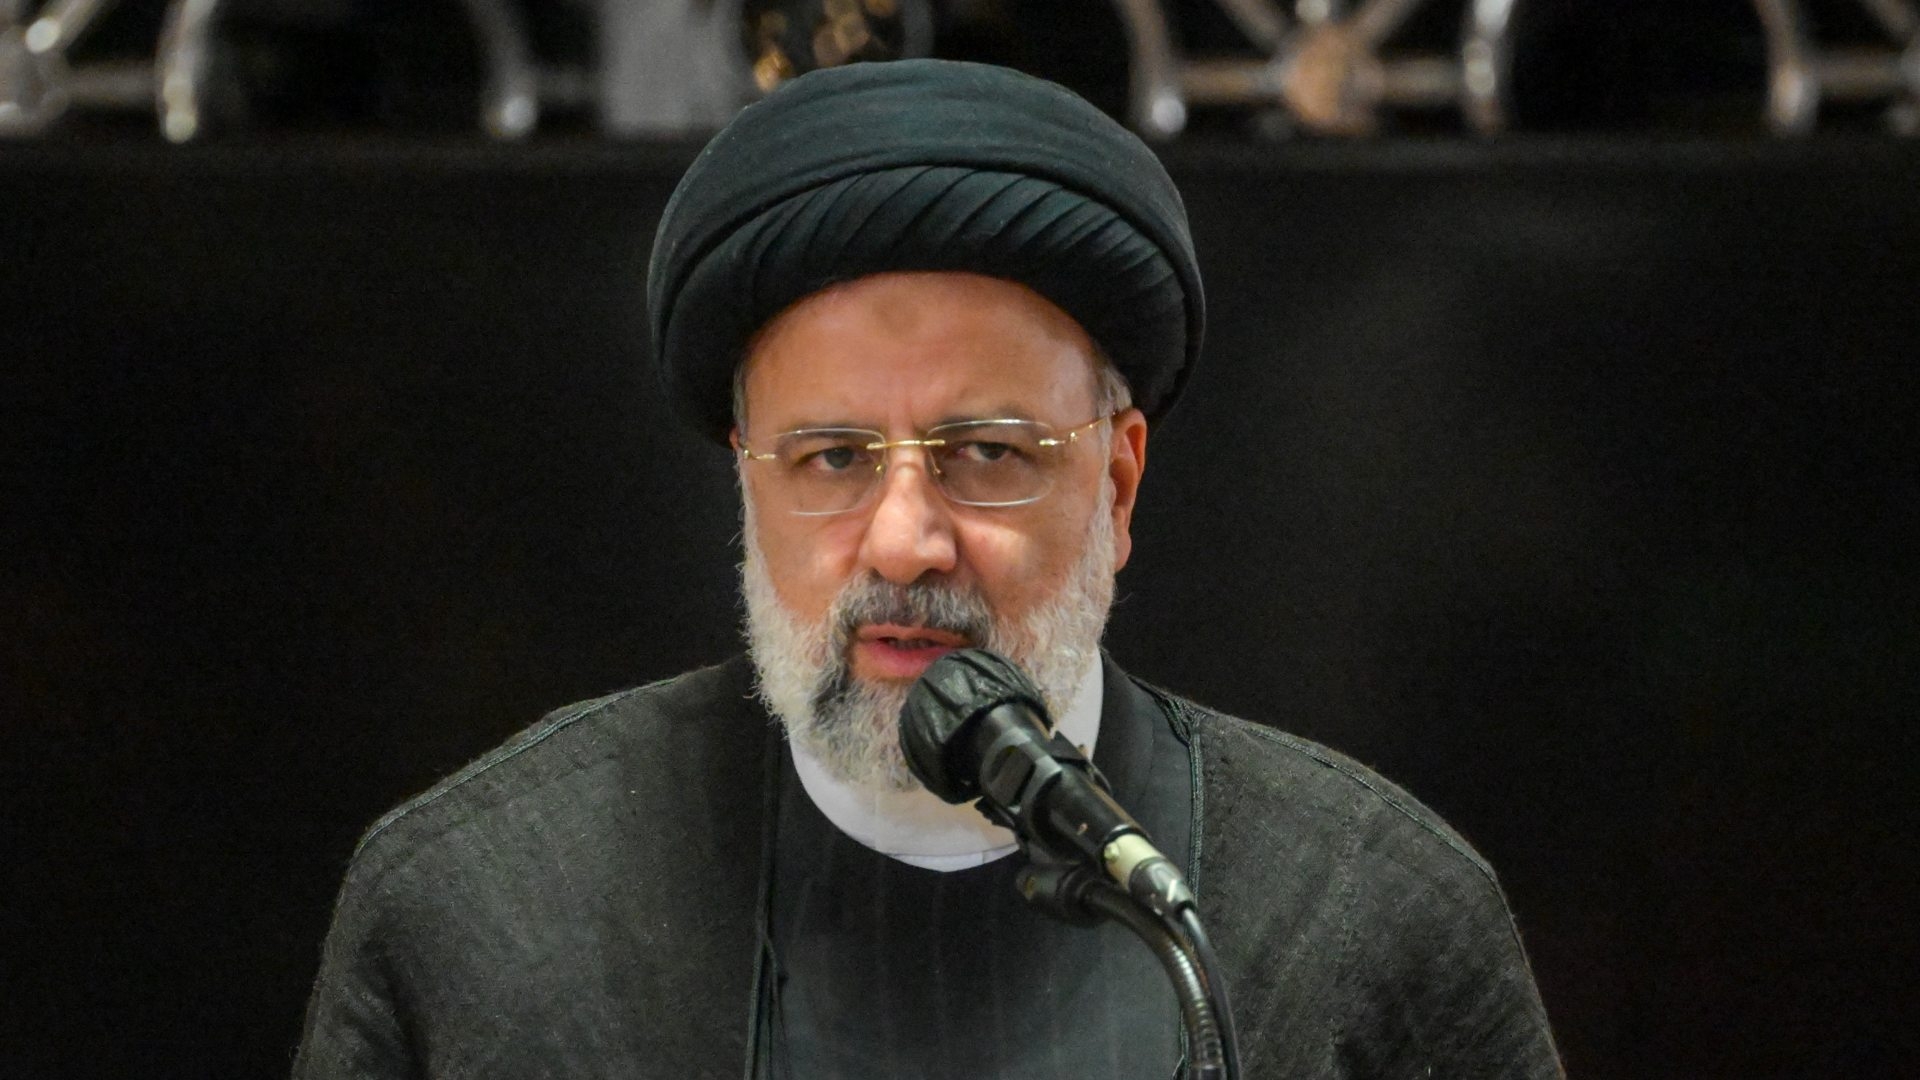 The trip marks Ebrahim Raisi's 13th visit abroad since taking office.